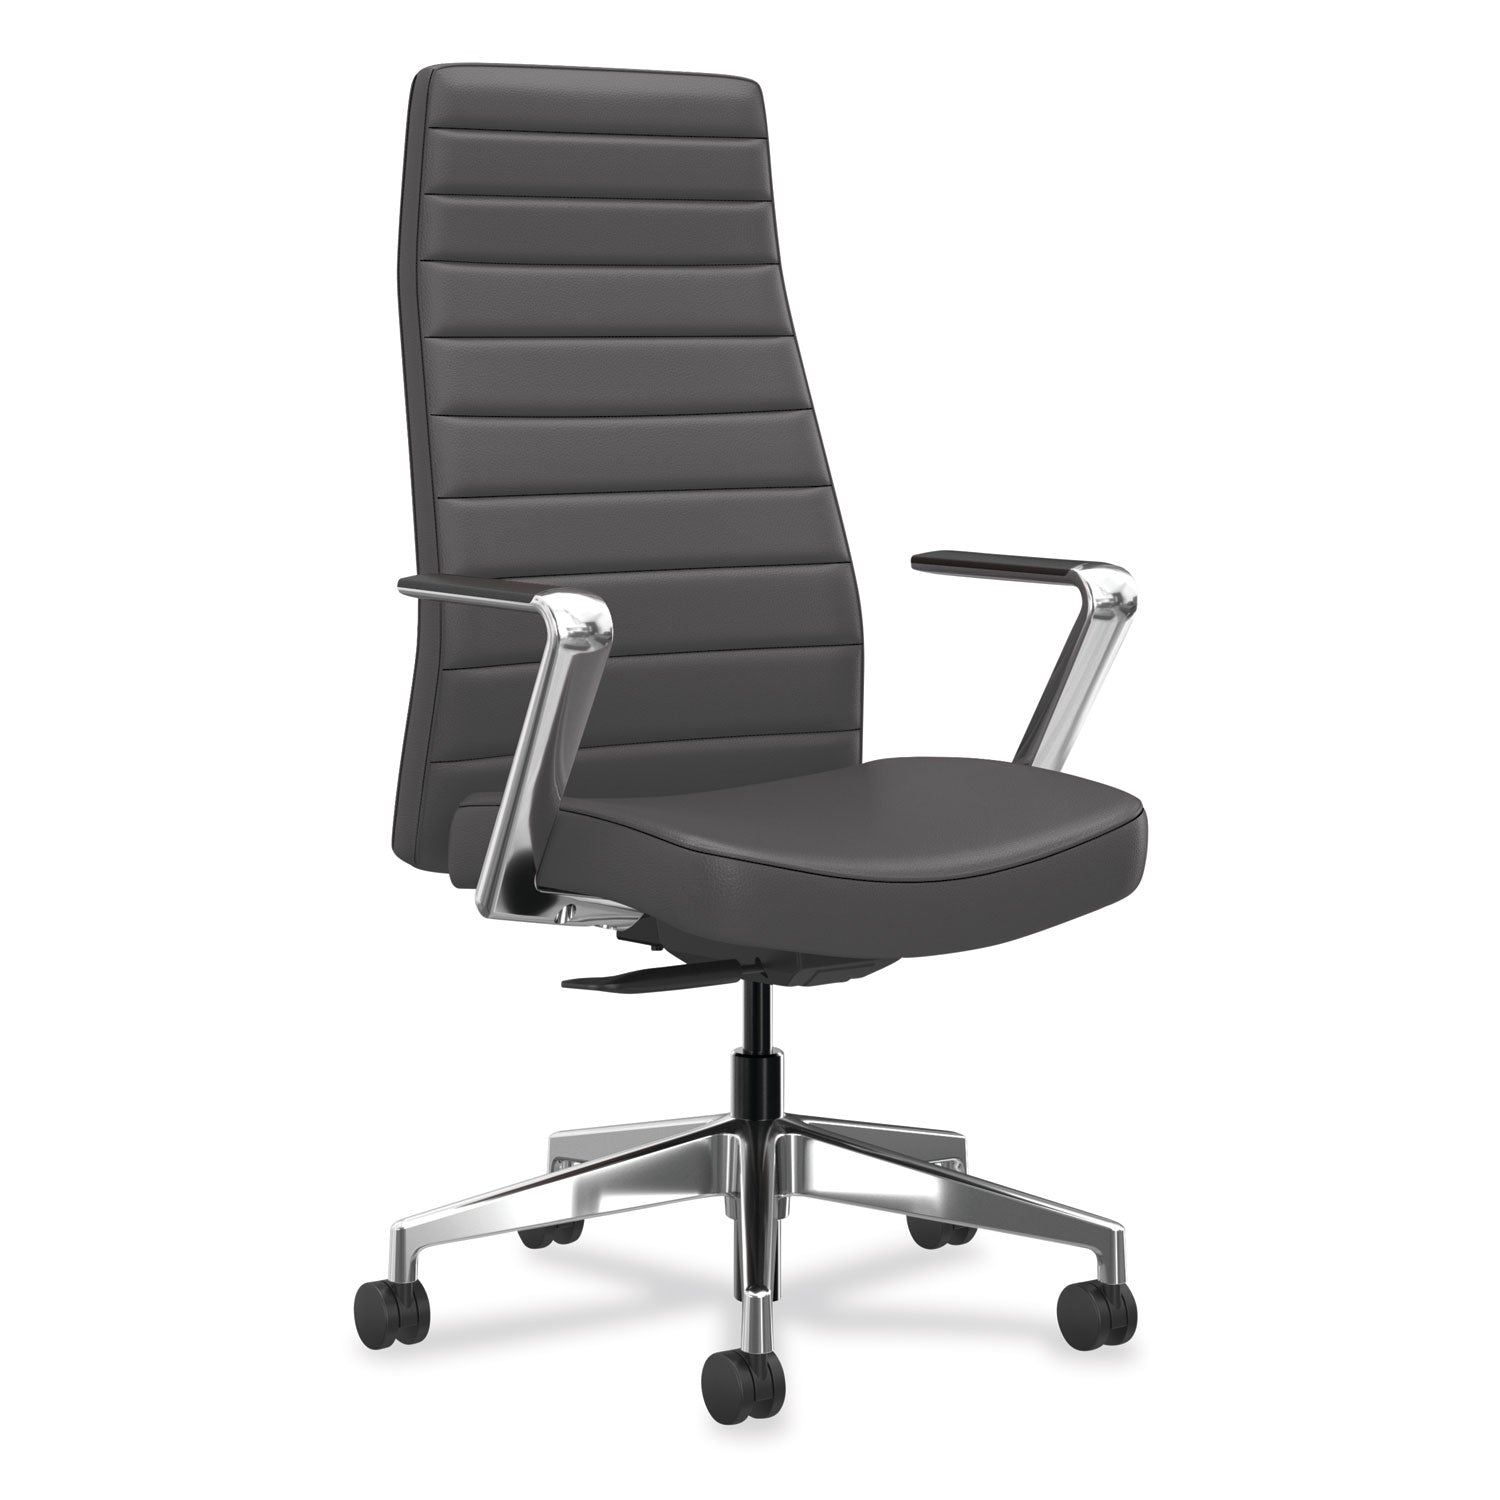 cofi-executive-high-back-chair-supports-up-to-300-lb-graphite-seat-back-polished-aluminum-baseships-in-7-10-business-days_honceuw0pu19c4p - 1